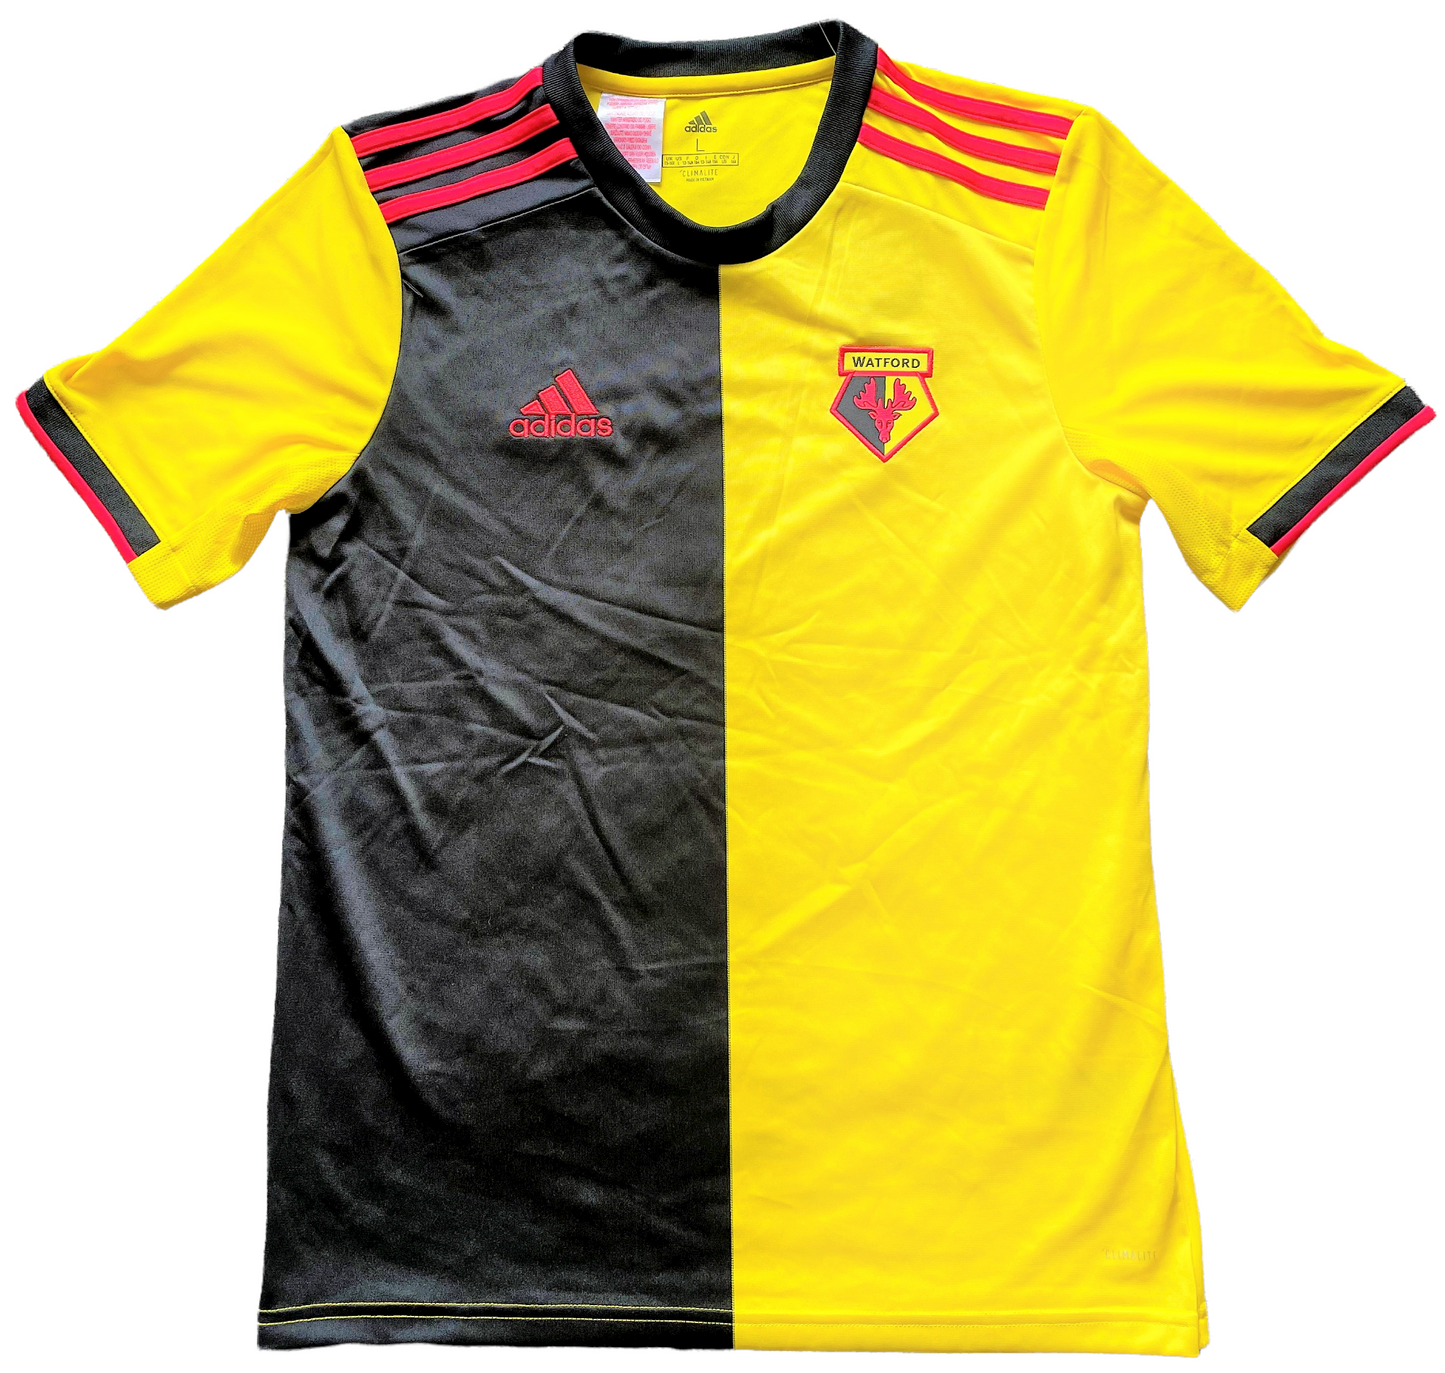 2019-20 Watford Home Shirt (excellent) Youths 13-14 years